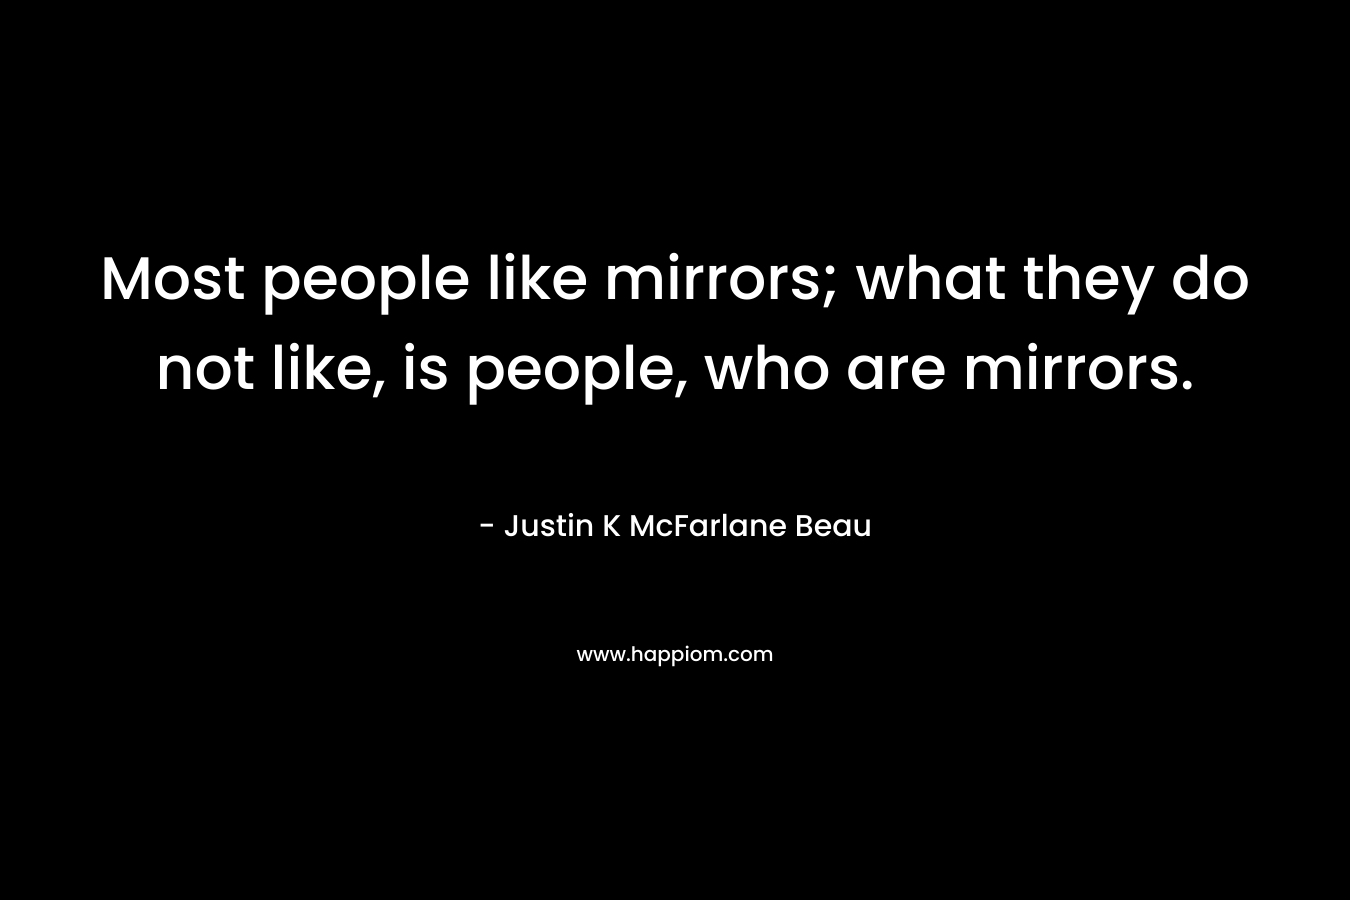 Most people like mirrors; what they do not like, is people, who are mirrors.